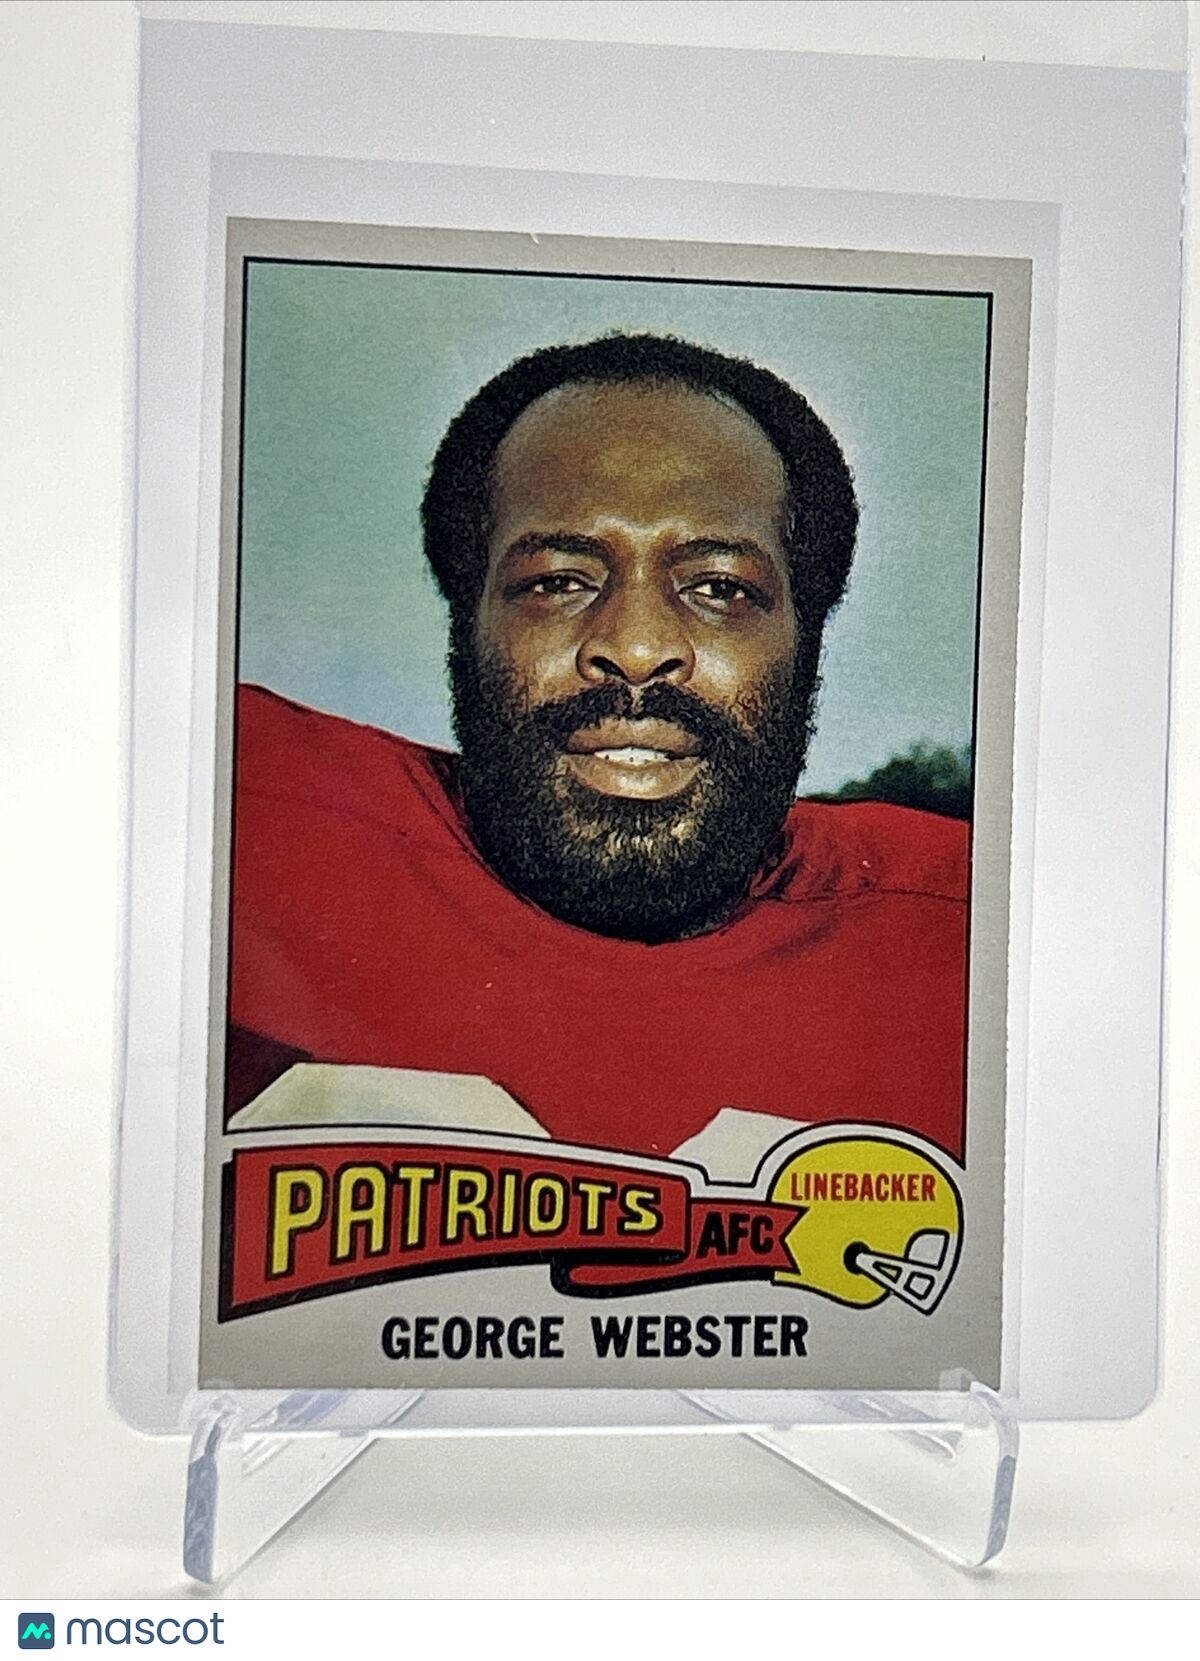 1975 Topps George Webster Football Card #186 EX-MT Quality FREE SHIPPING